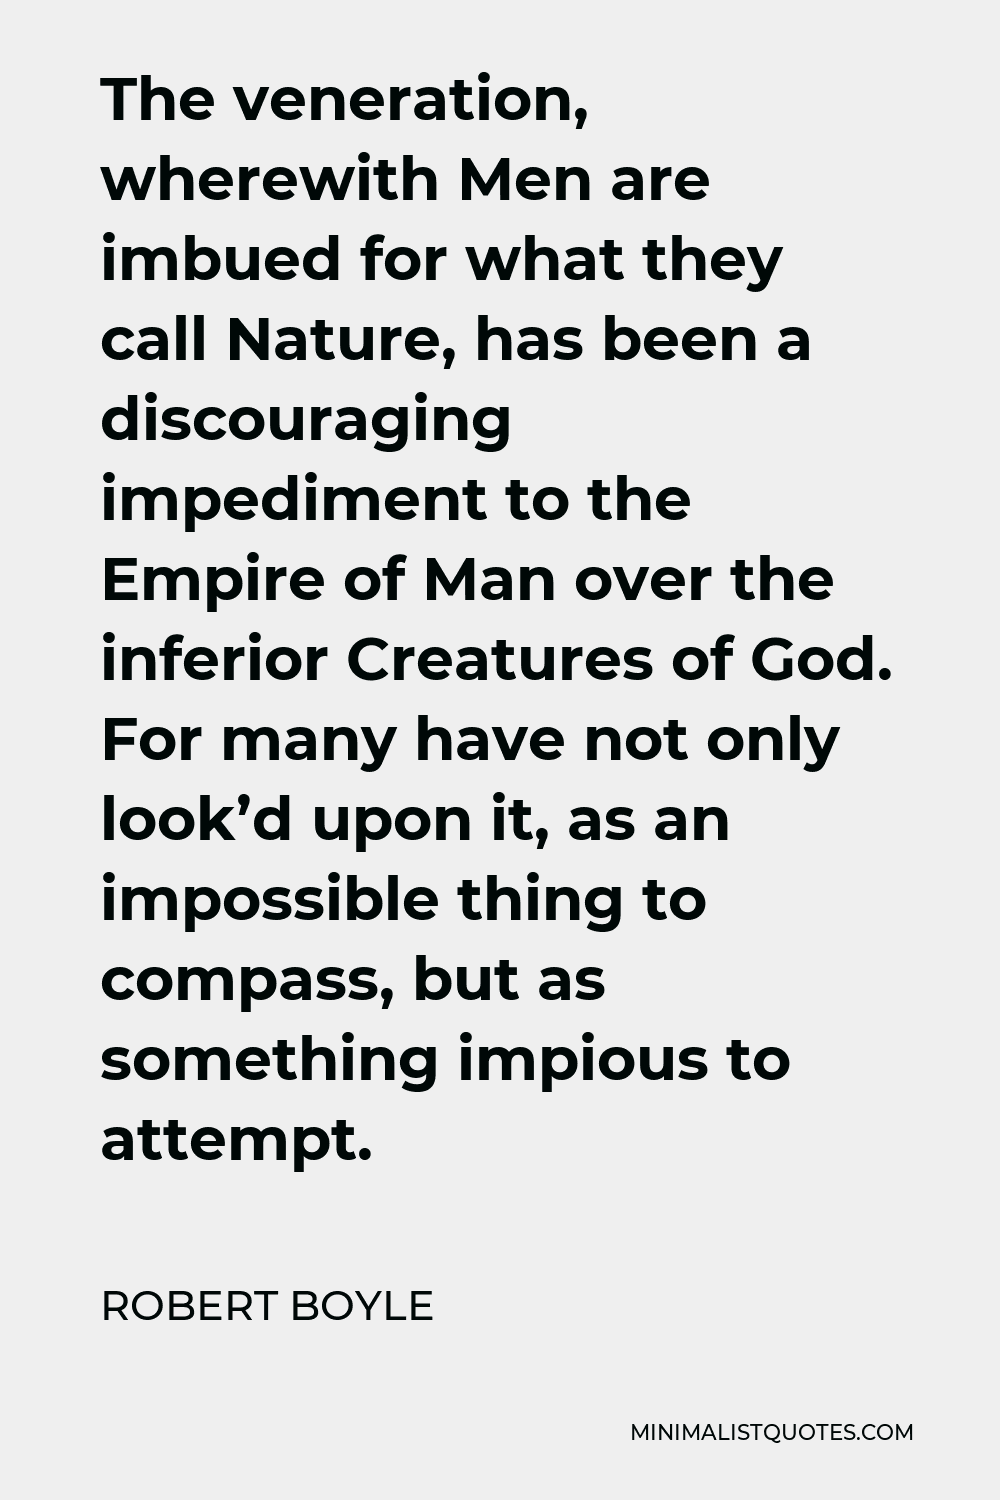 Robert Boyle Quote - The veneration, wherewith Men are imbued for what they call Nature, has been a discouraging impediment to the Empire of Man over the inferior Creatures of God. For many have not only look’d upon it, as an impossible thing to compass, but as something impious to attempt.